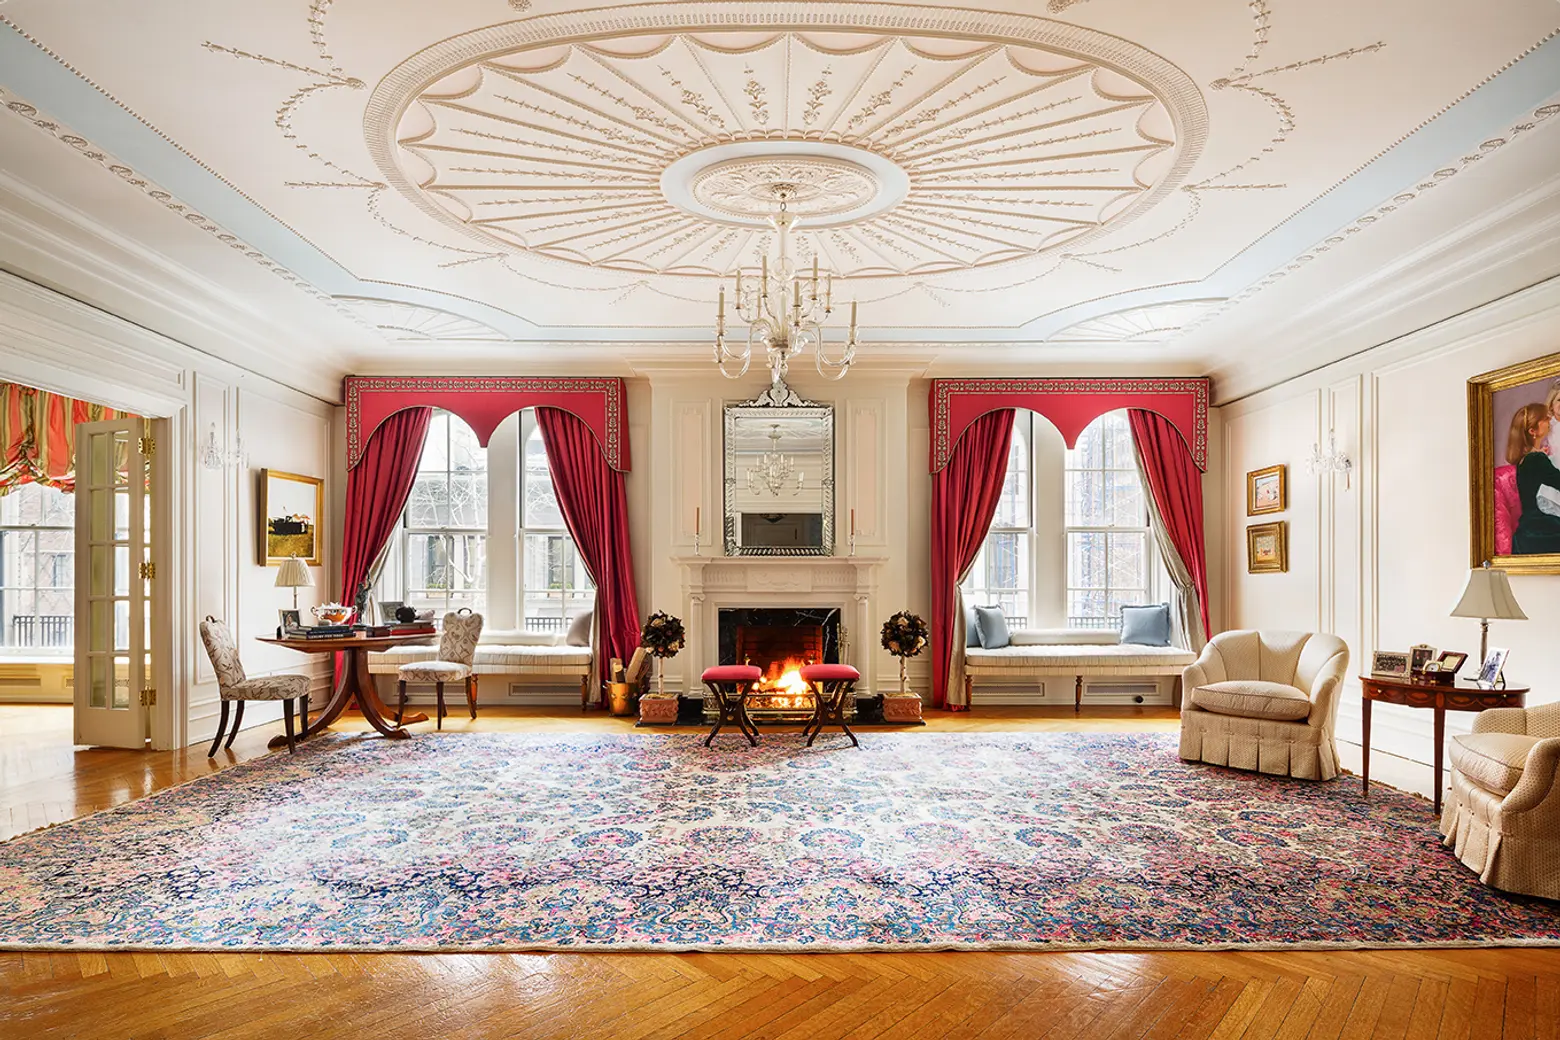 Once home to Rosario Candela’s daughter, this $7.5M Upper East Side triplex feels like a country retreat